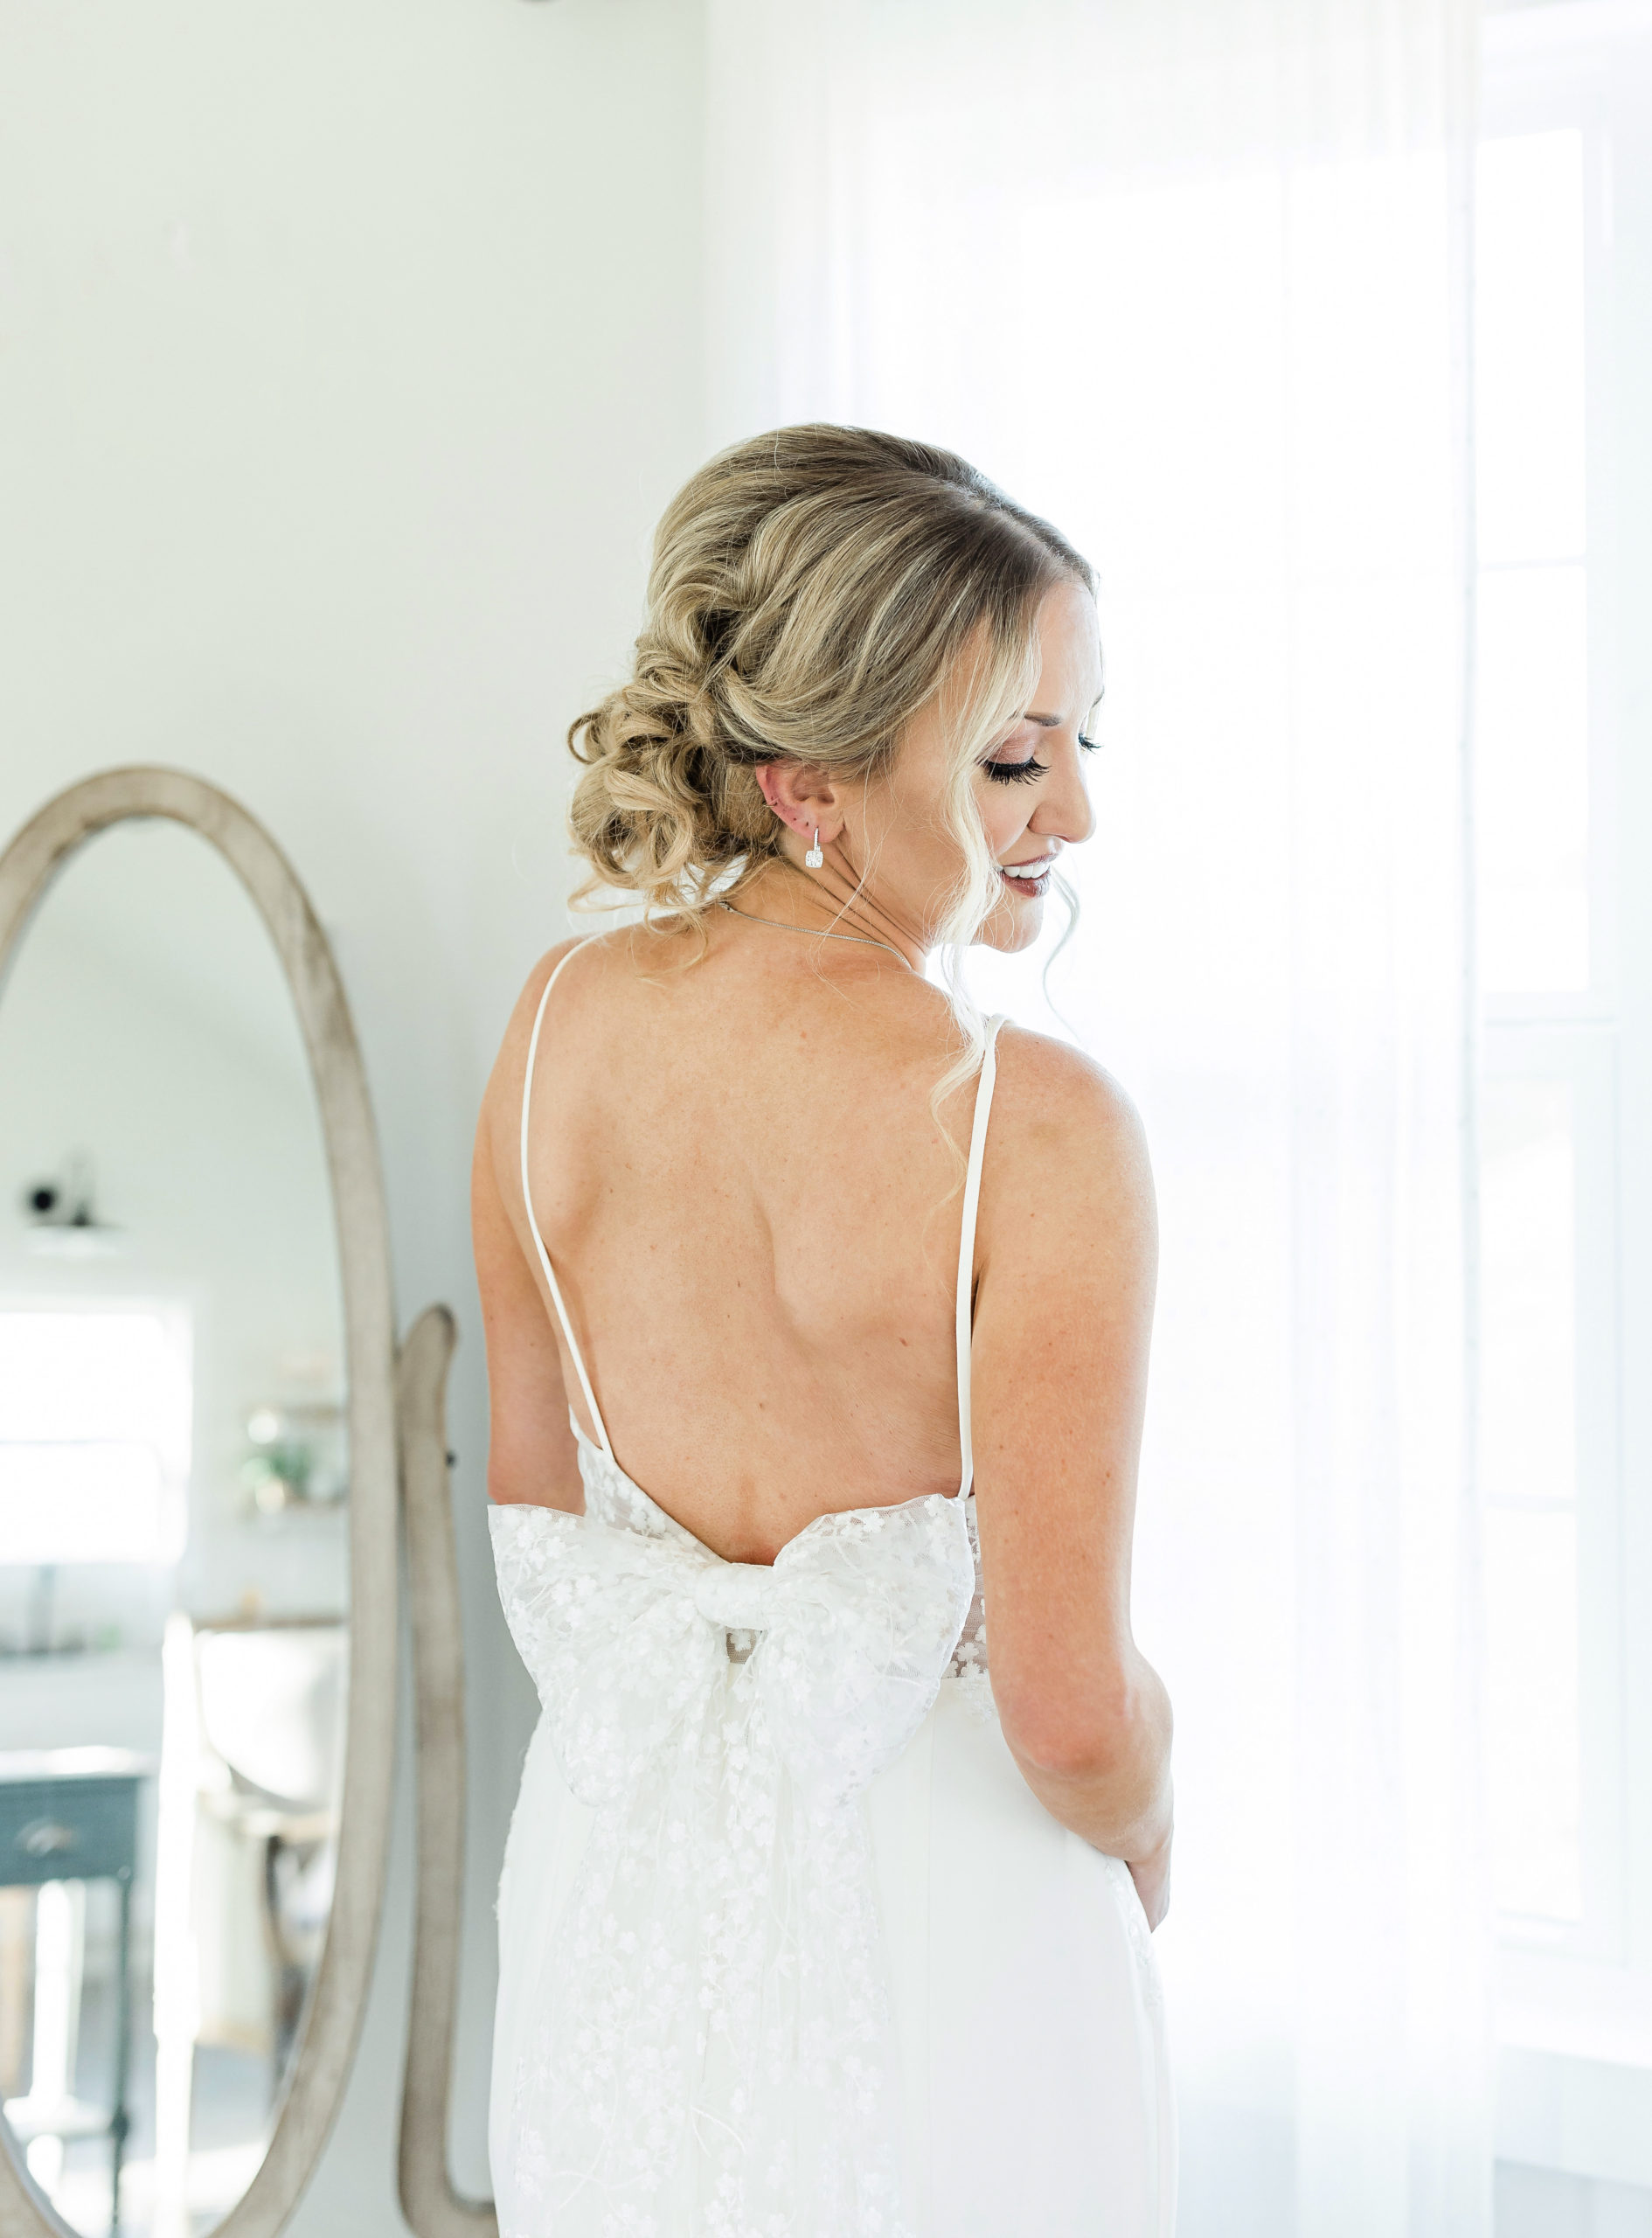 Bride smiles as she shows the back dress details of her dress captured by Tatyana Zadorin Photography. Close up of bride placing her hand on her chest showing off her ring and necklace taken in natural light